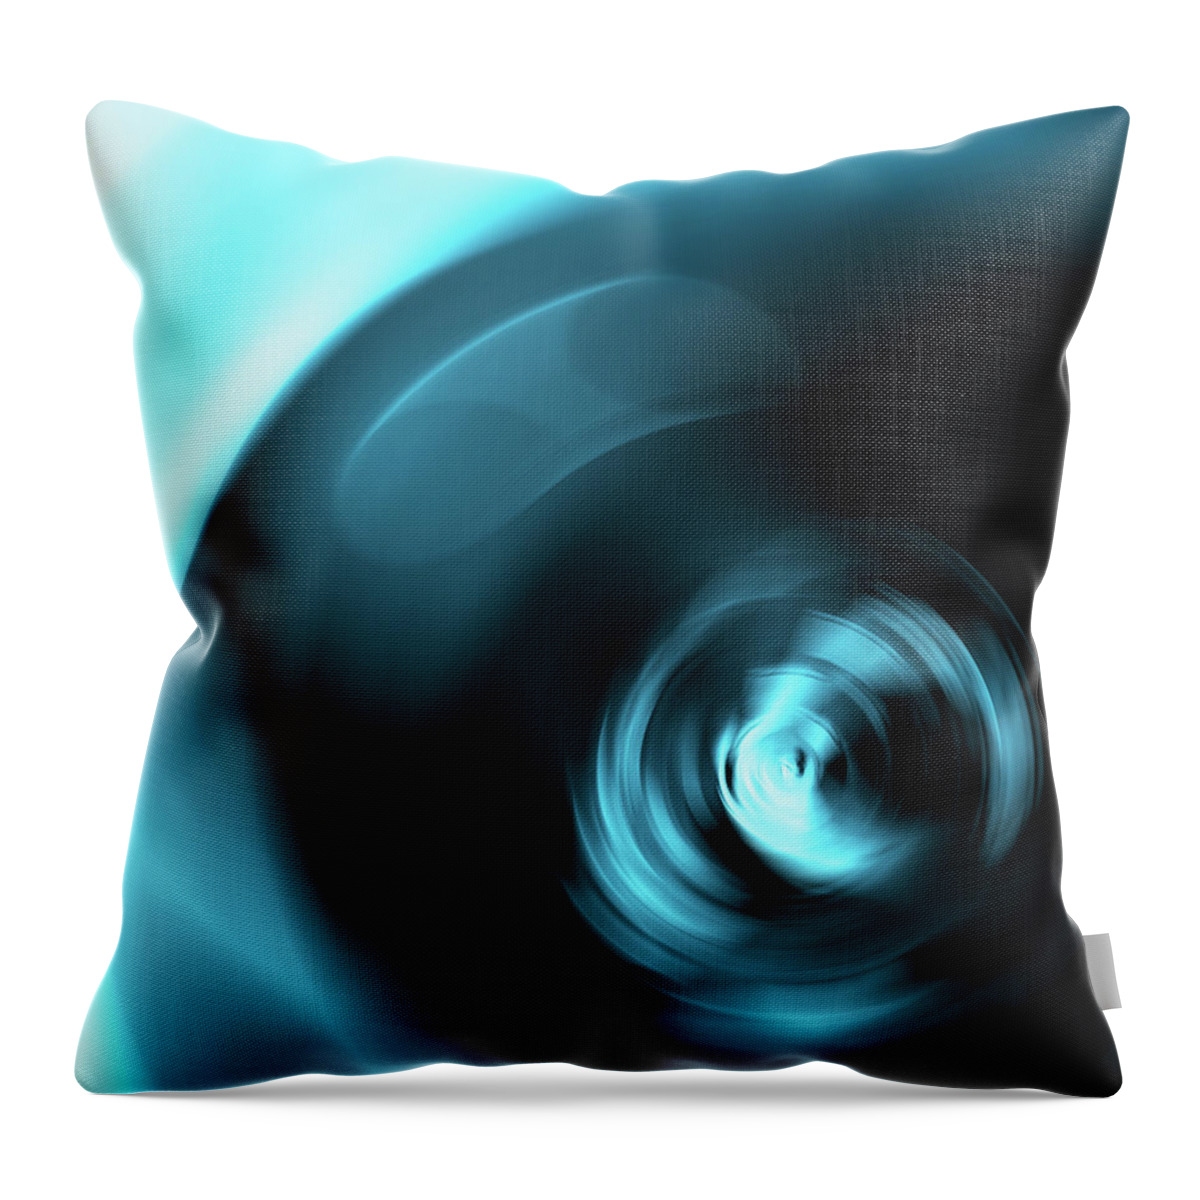 Art Throw Pillow featuring the photograph Abstract Background Pattern by Duncan1890